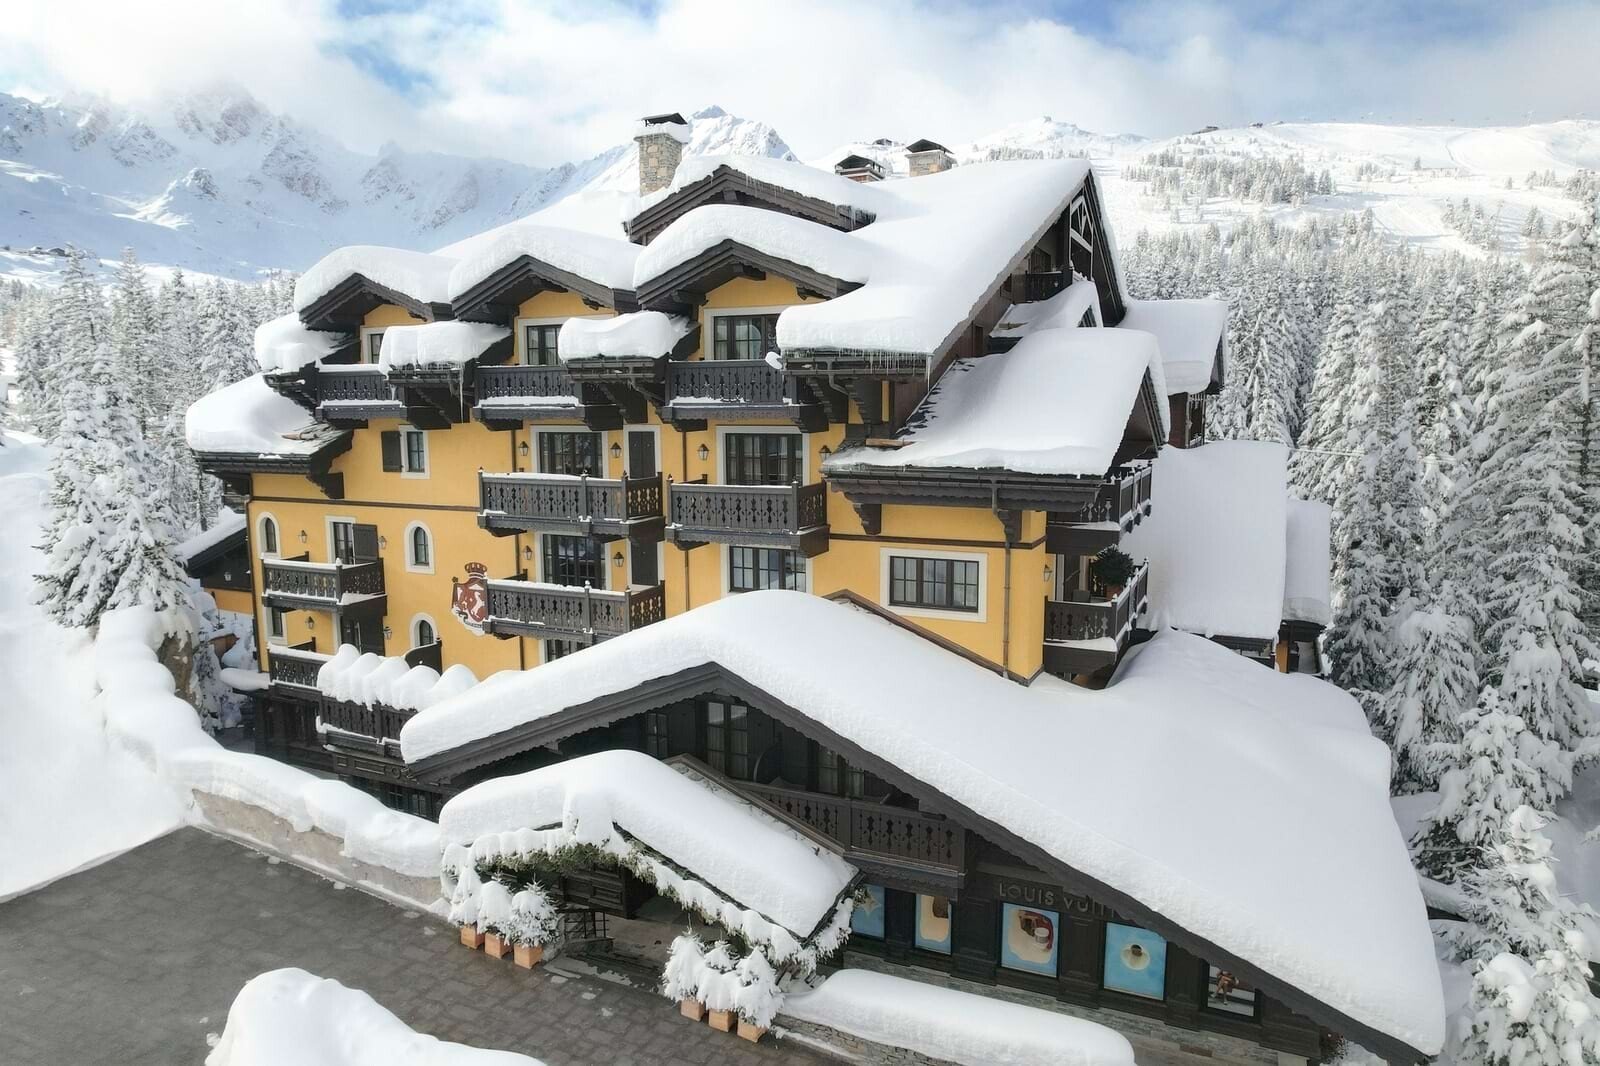 Hotel Cheval Blanc Courchevel, France - book now, 2023 prices